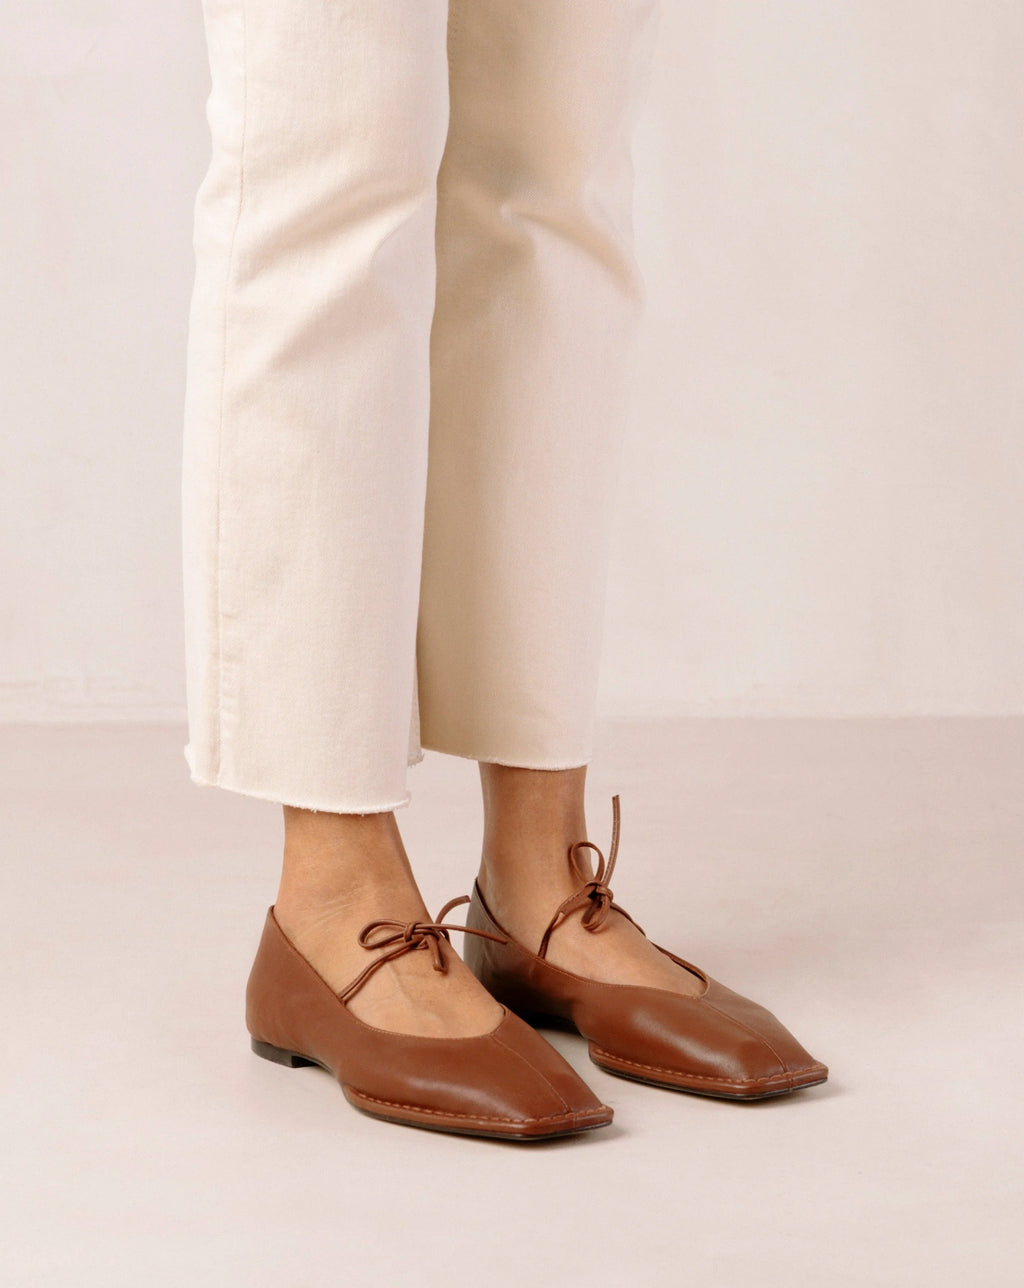 ALOHAS Sway Ballet Flats in Chestnut Brown